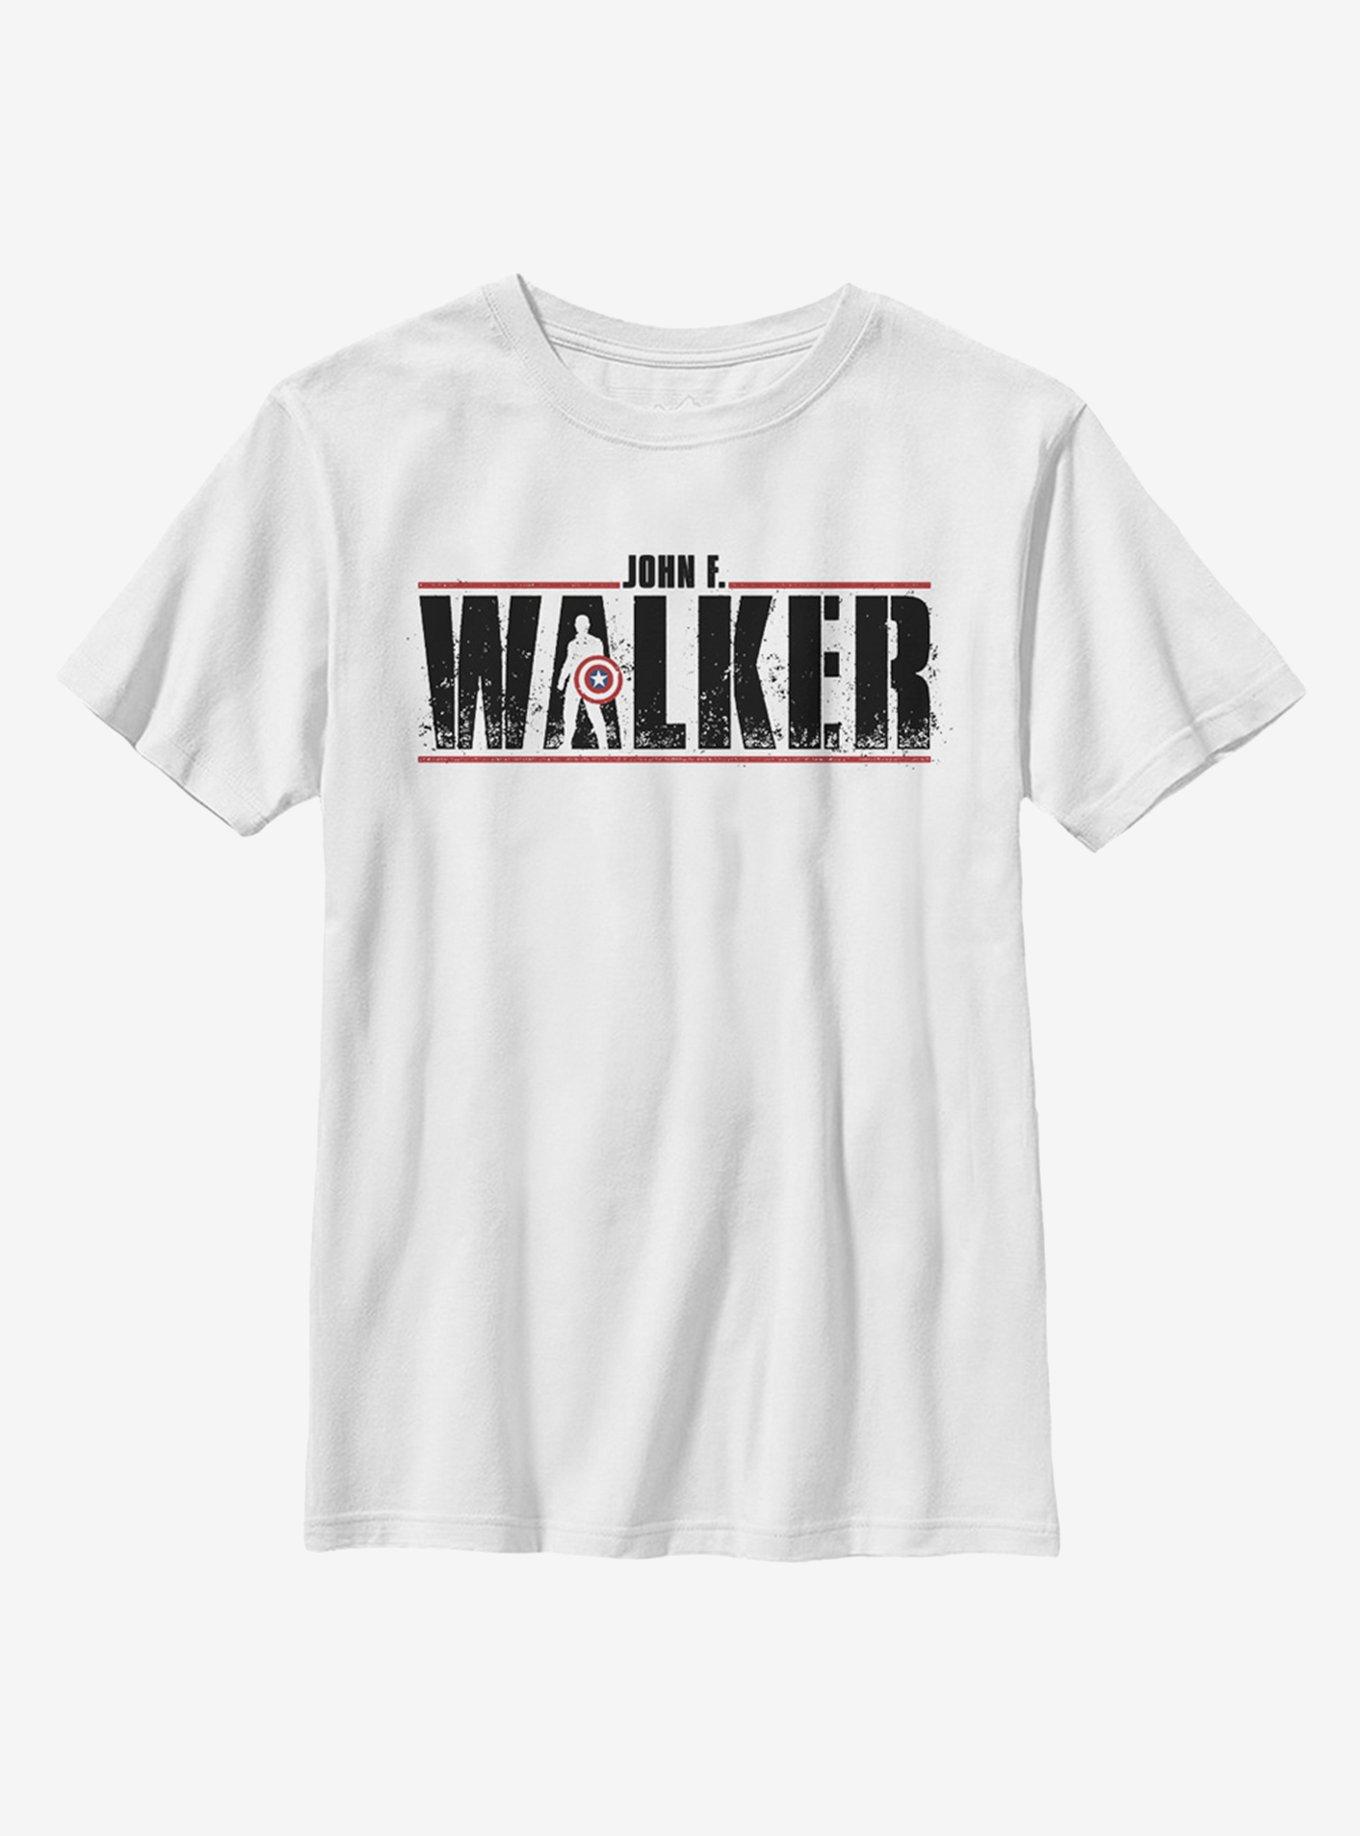 Marvel The Falcon And The Winter Soldier Walker Painted Youth T-Shirt, WHITE, hi-res